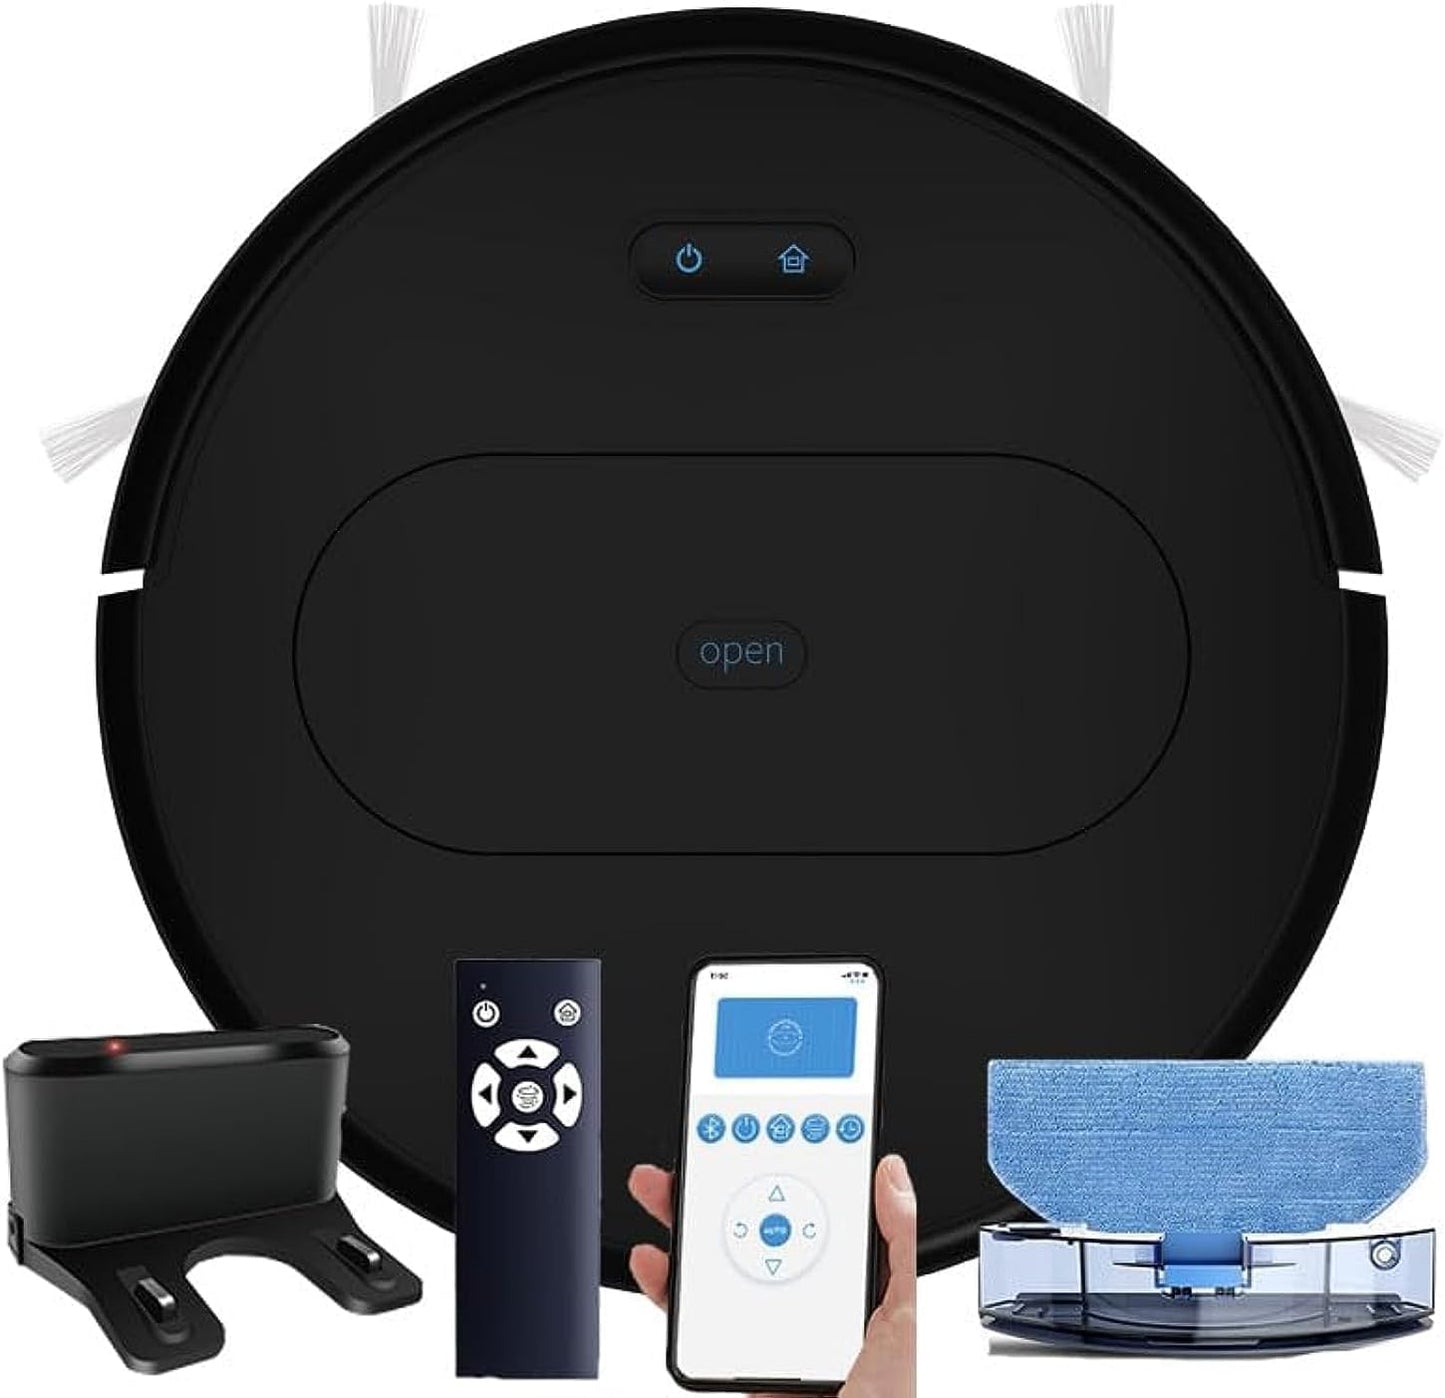 Robot Vacuum with Mop, 3600Pa Automatic Self-Charging Robotic Vacuum Cleaner,2 in 1 Mopping Robot Vacuum with Watertank & Dustbin,Self-Charging,Slim,Strong Suction,Ideal for Hard Floor,Pet Hair,Carpet